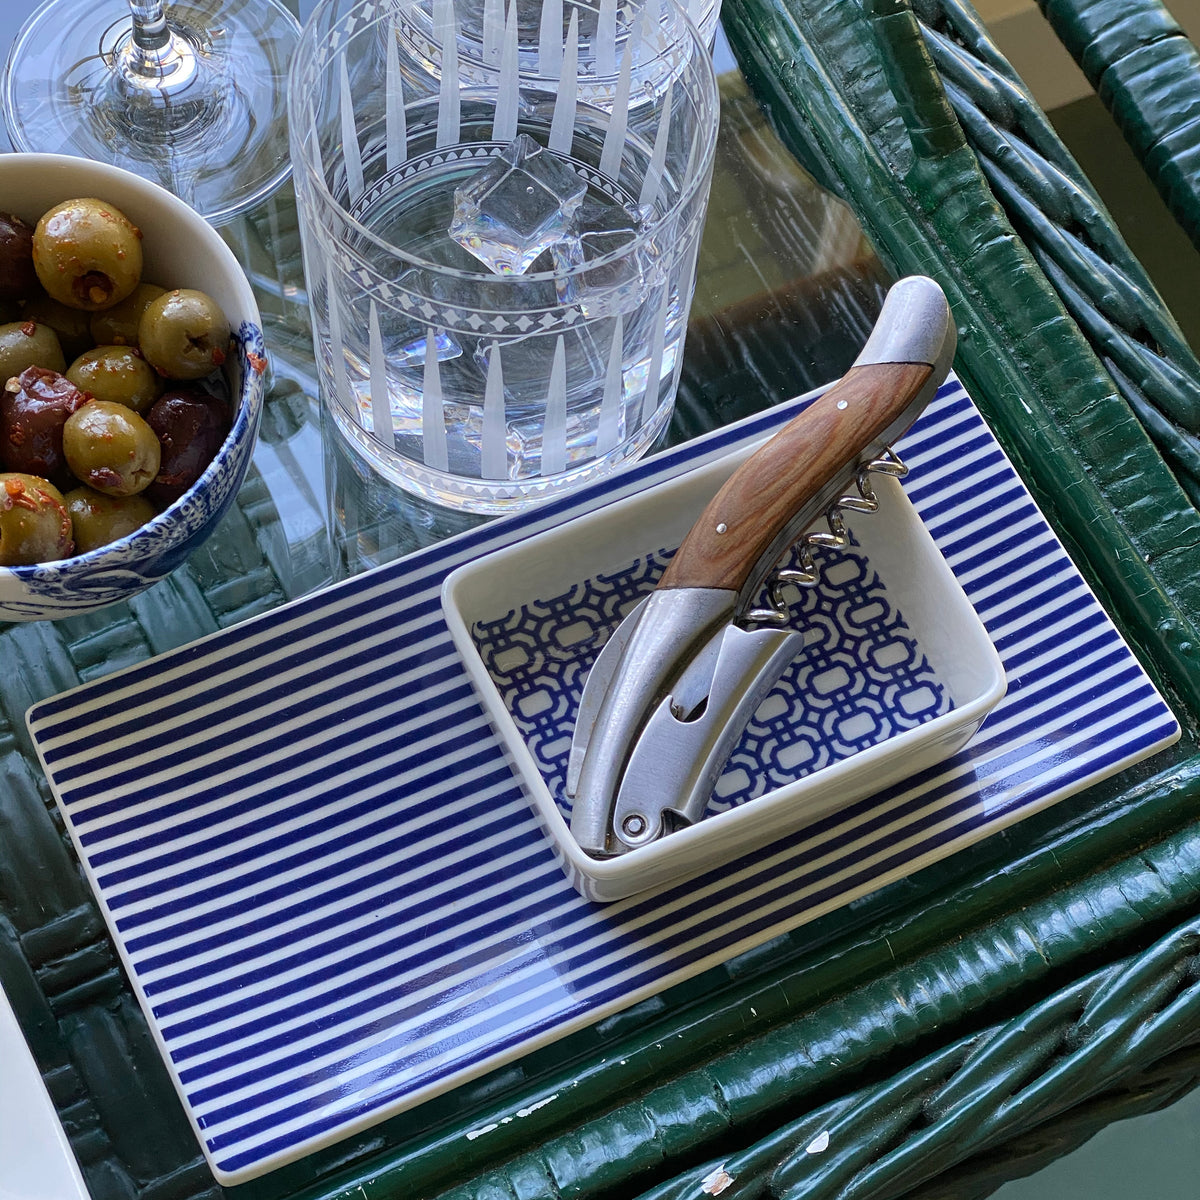 A Newport Nested Appetizer Tray Set with small bites of olives and a bottle of wine from Caskata.